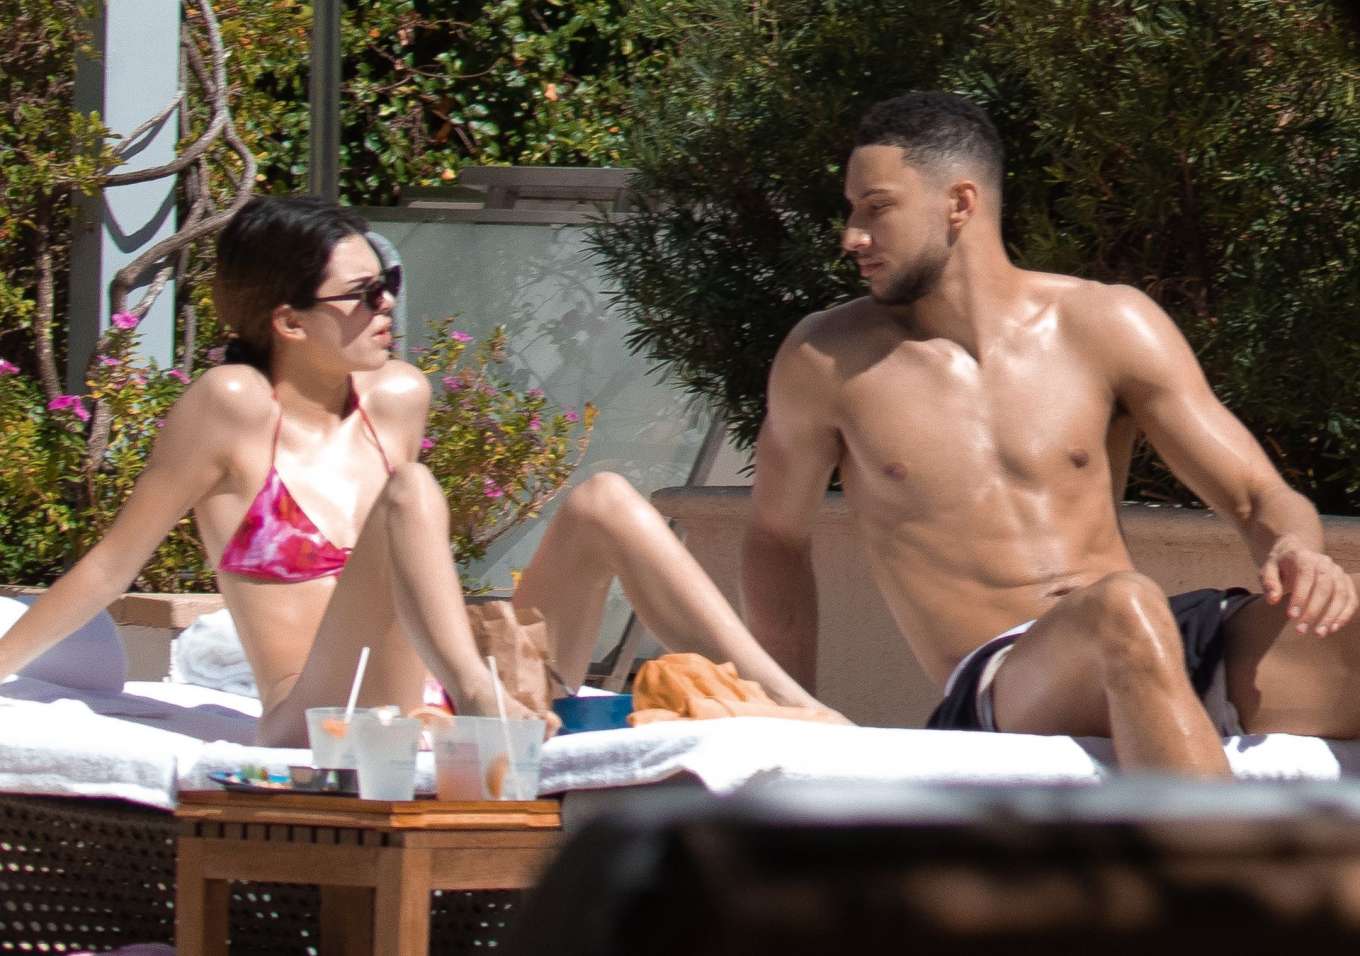 Kendall Jenner - Poolside bikini candids with her BF in Miami.